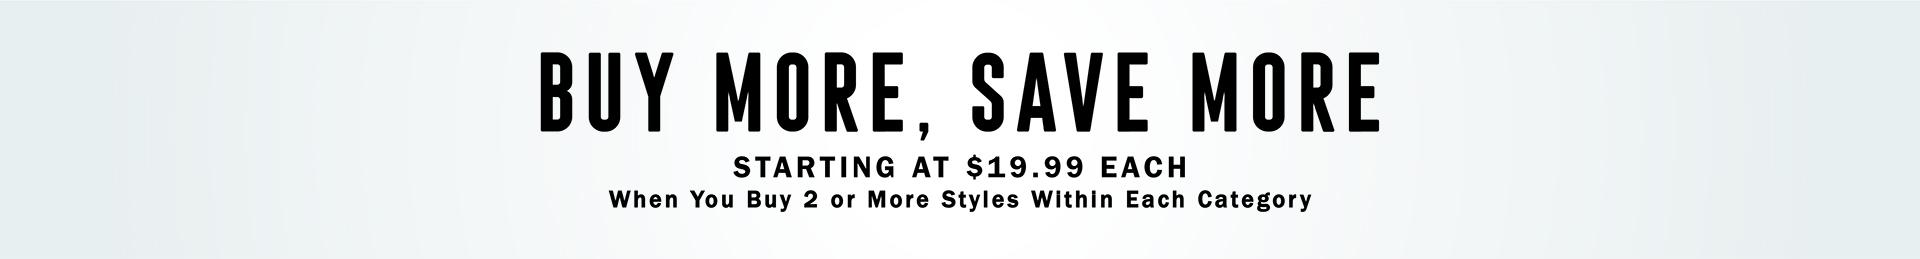 BUY MORE, SAVE MORE STARTING AT $19.99 EACH When You Buy 2 or More Styles Within Each Category